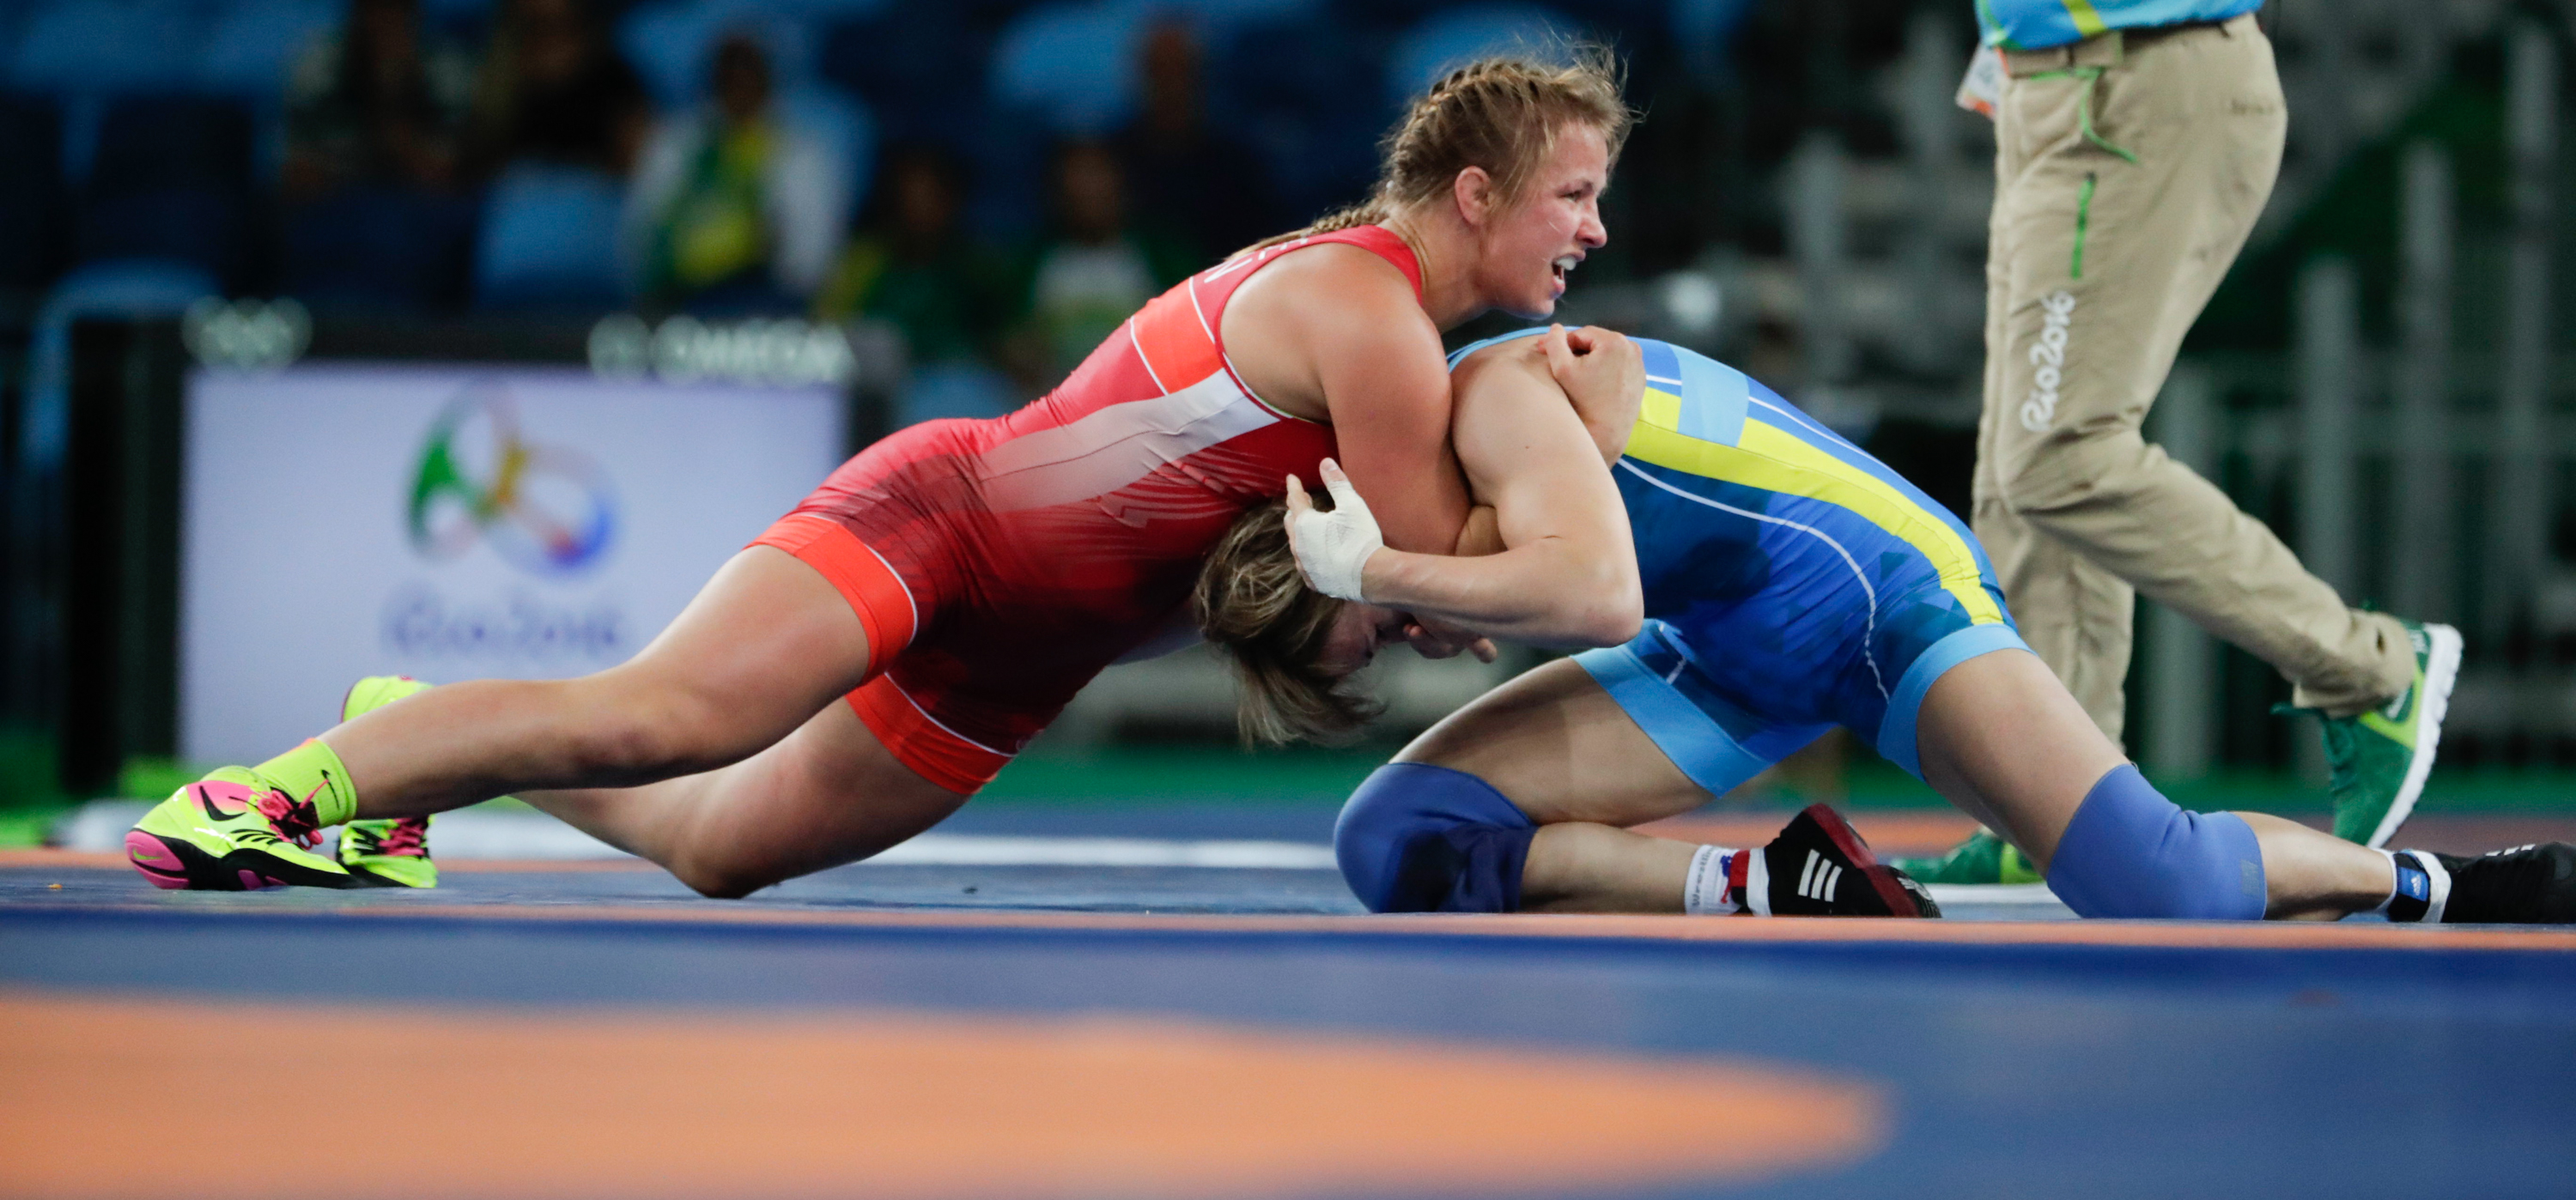 Erica Wiebe wrestles in the 75kg gold medal match at Rio 2016 (COC/Jason Ransom)